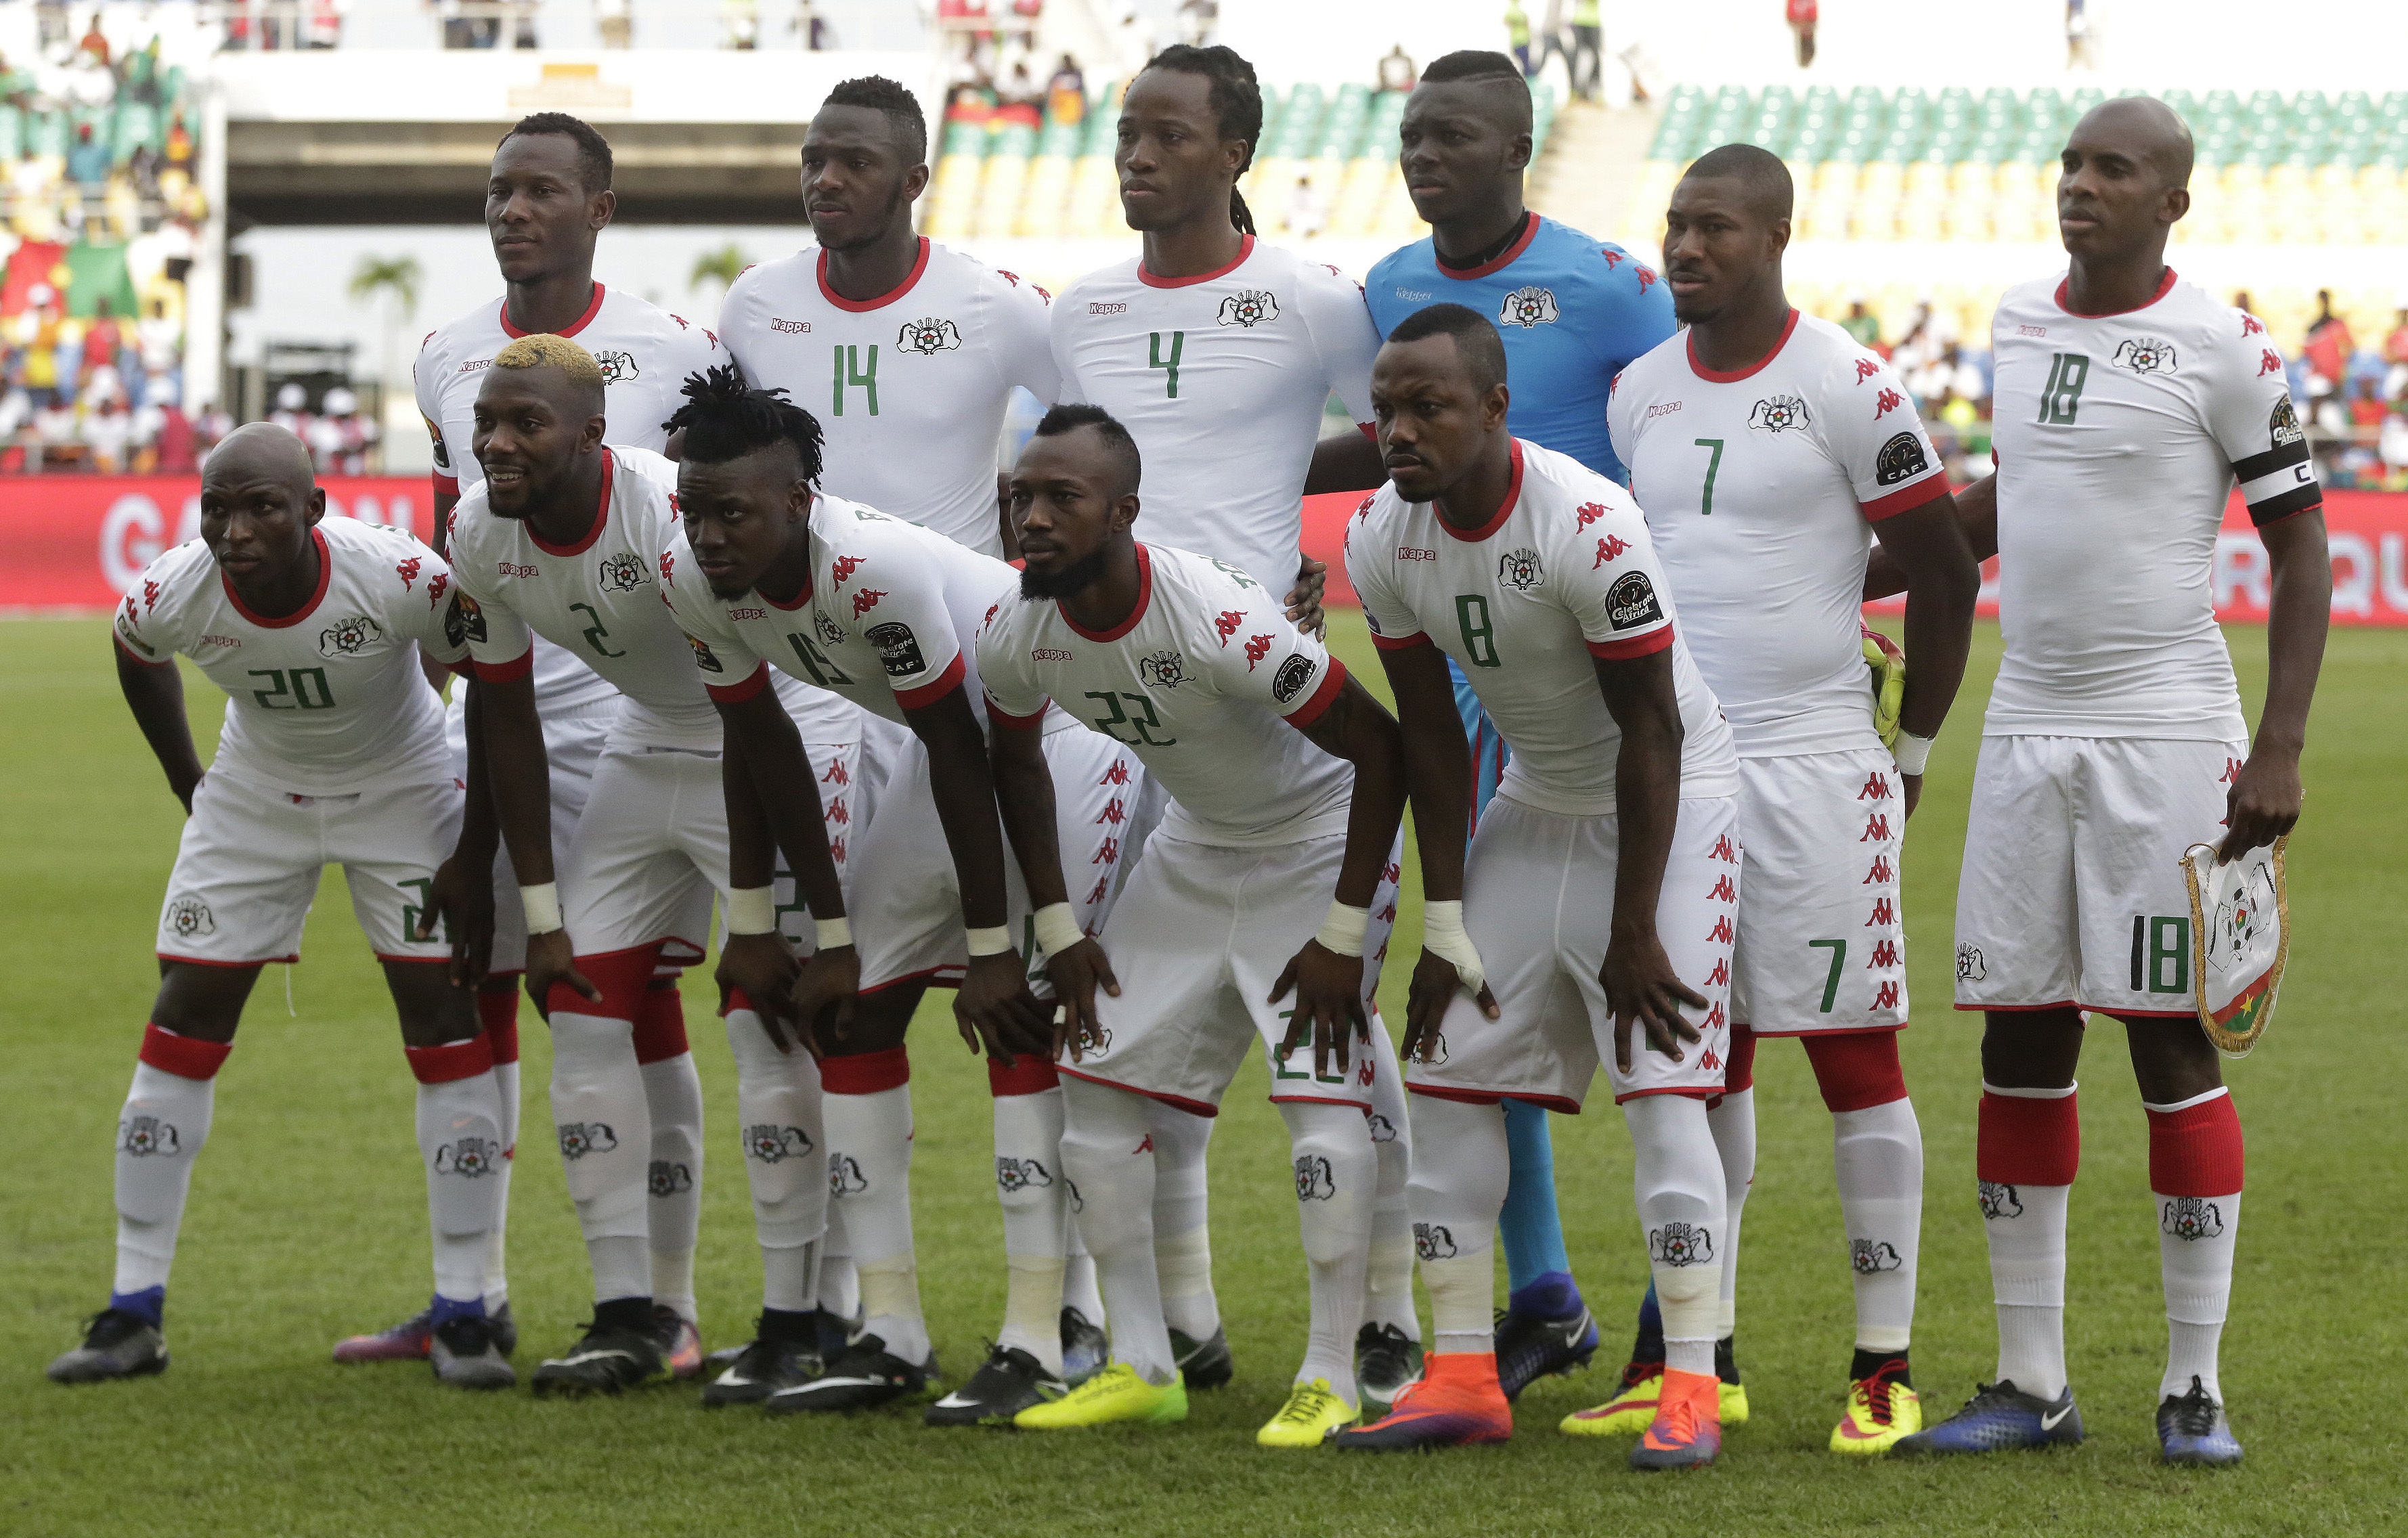 Burkina Faso's, soccer team poses for a group photo before their African Cup of Nations  Quarter Finals soccer match between Tunisia and Burkina Faso. at the Stade de l'Amitie Libreville, Gabon, Saturday, Jan. 28, 2017. (AP Photo/Sunday Alamba)